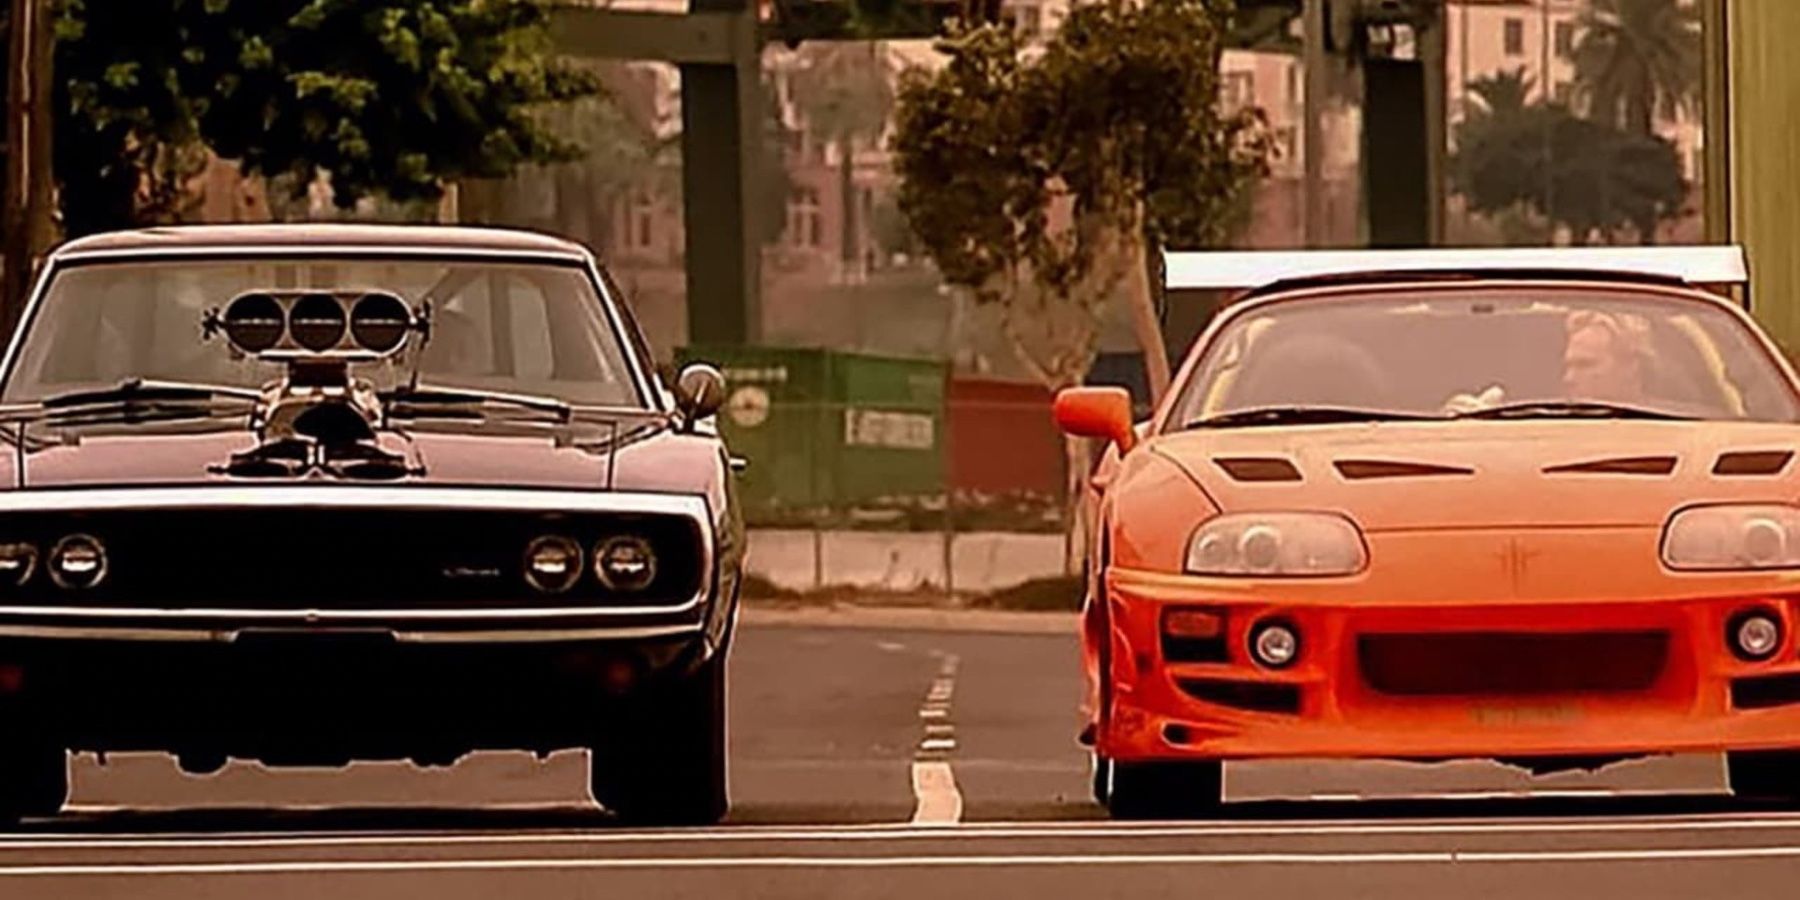 The-Fast-and-the-Furious-Dodge-Charger-and-Toyota-Supra